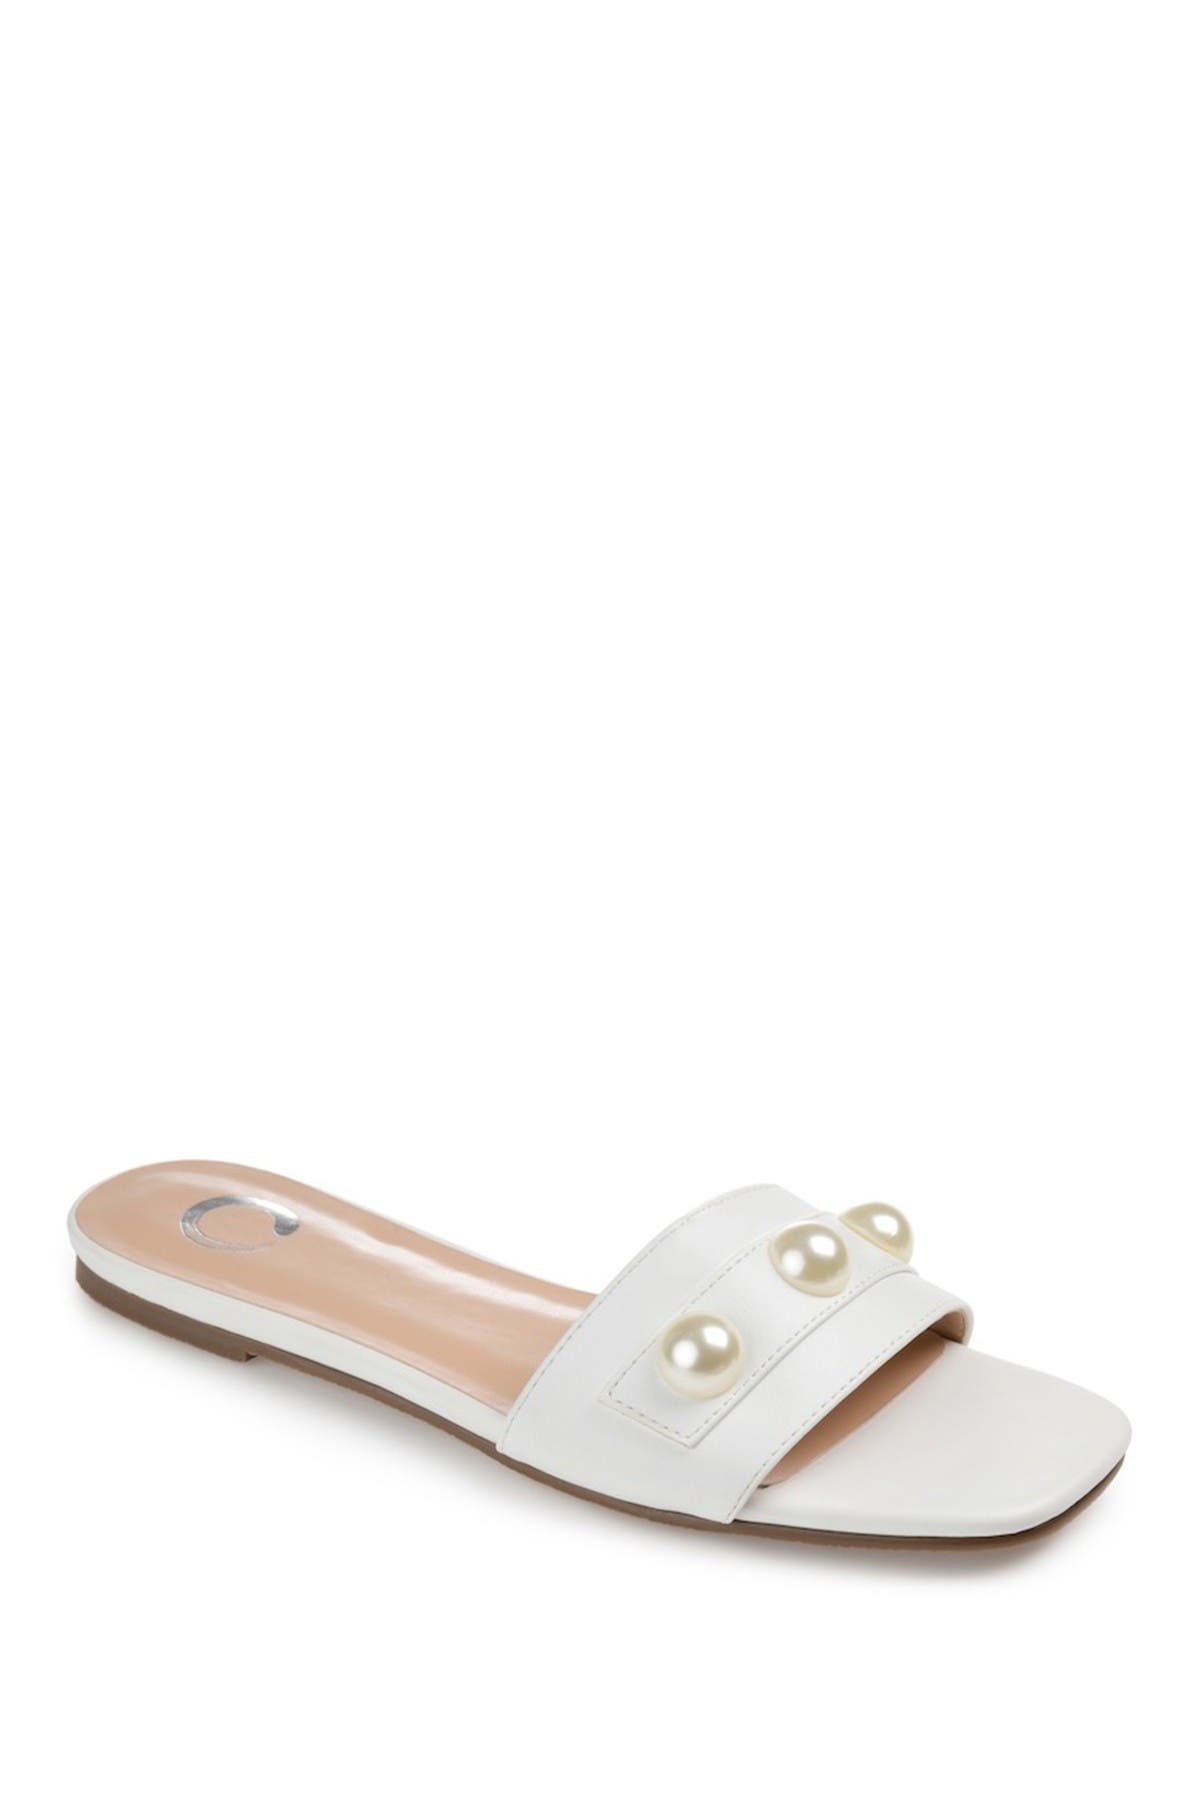 Journee Collection Journee Leonie Pearly Stud Slide Sandal In White